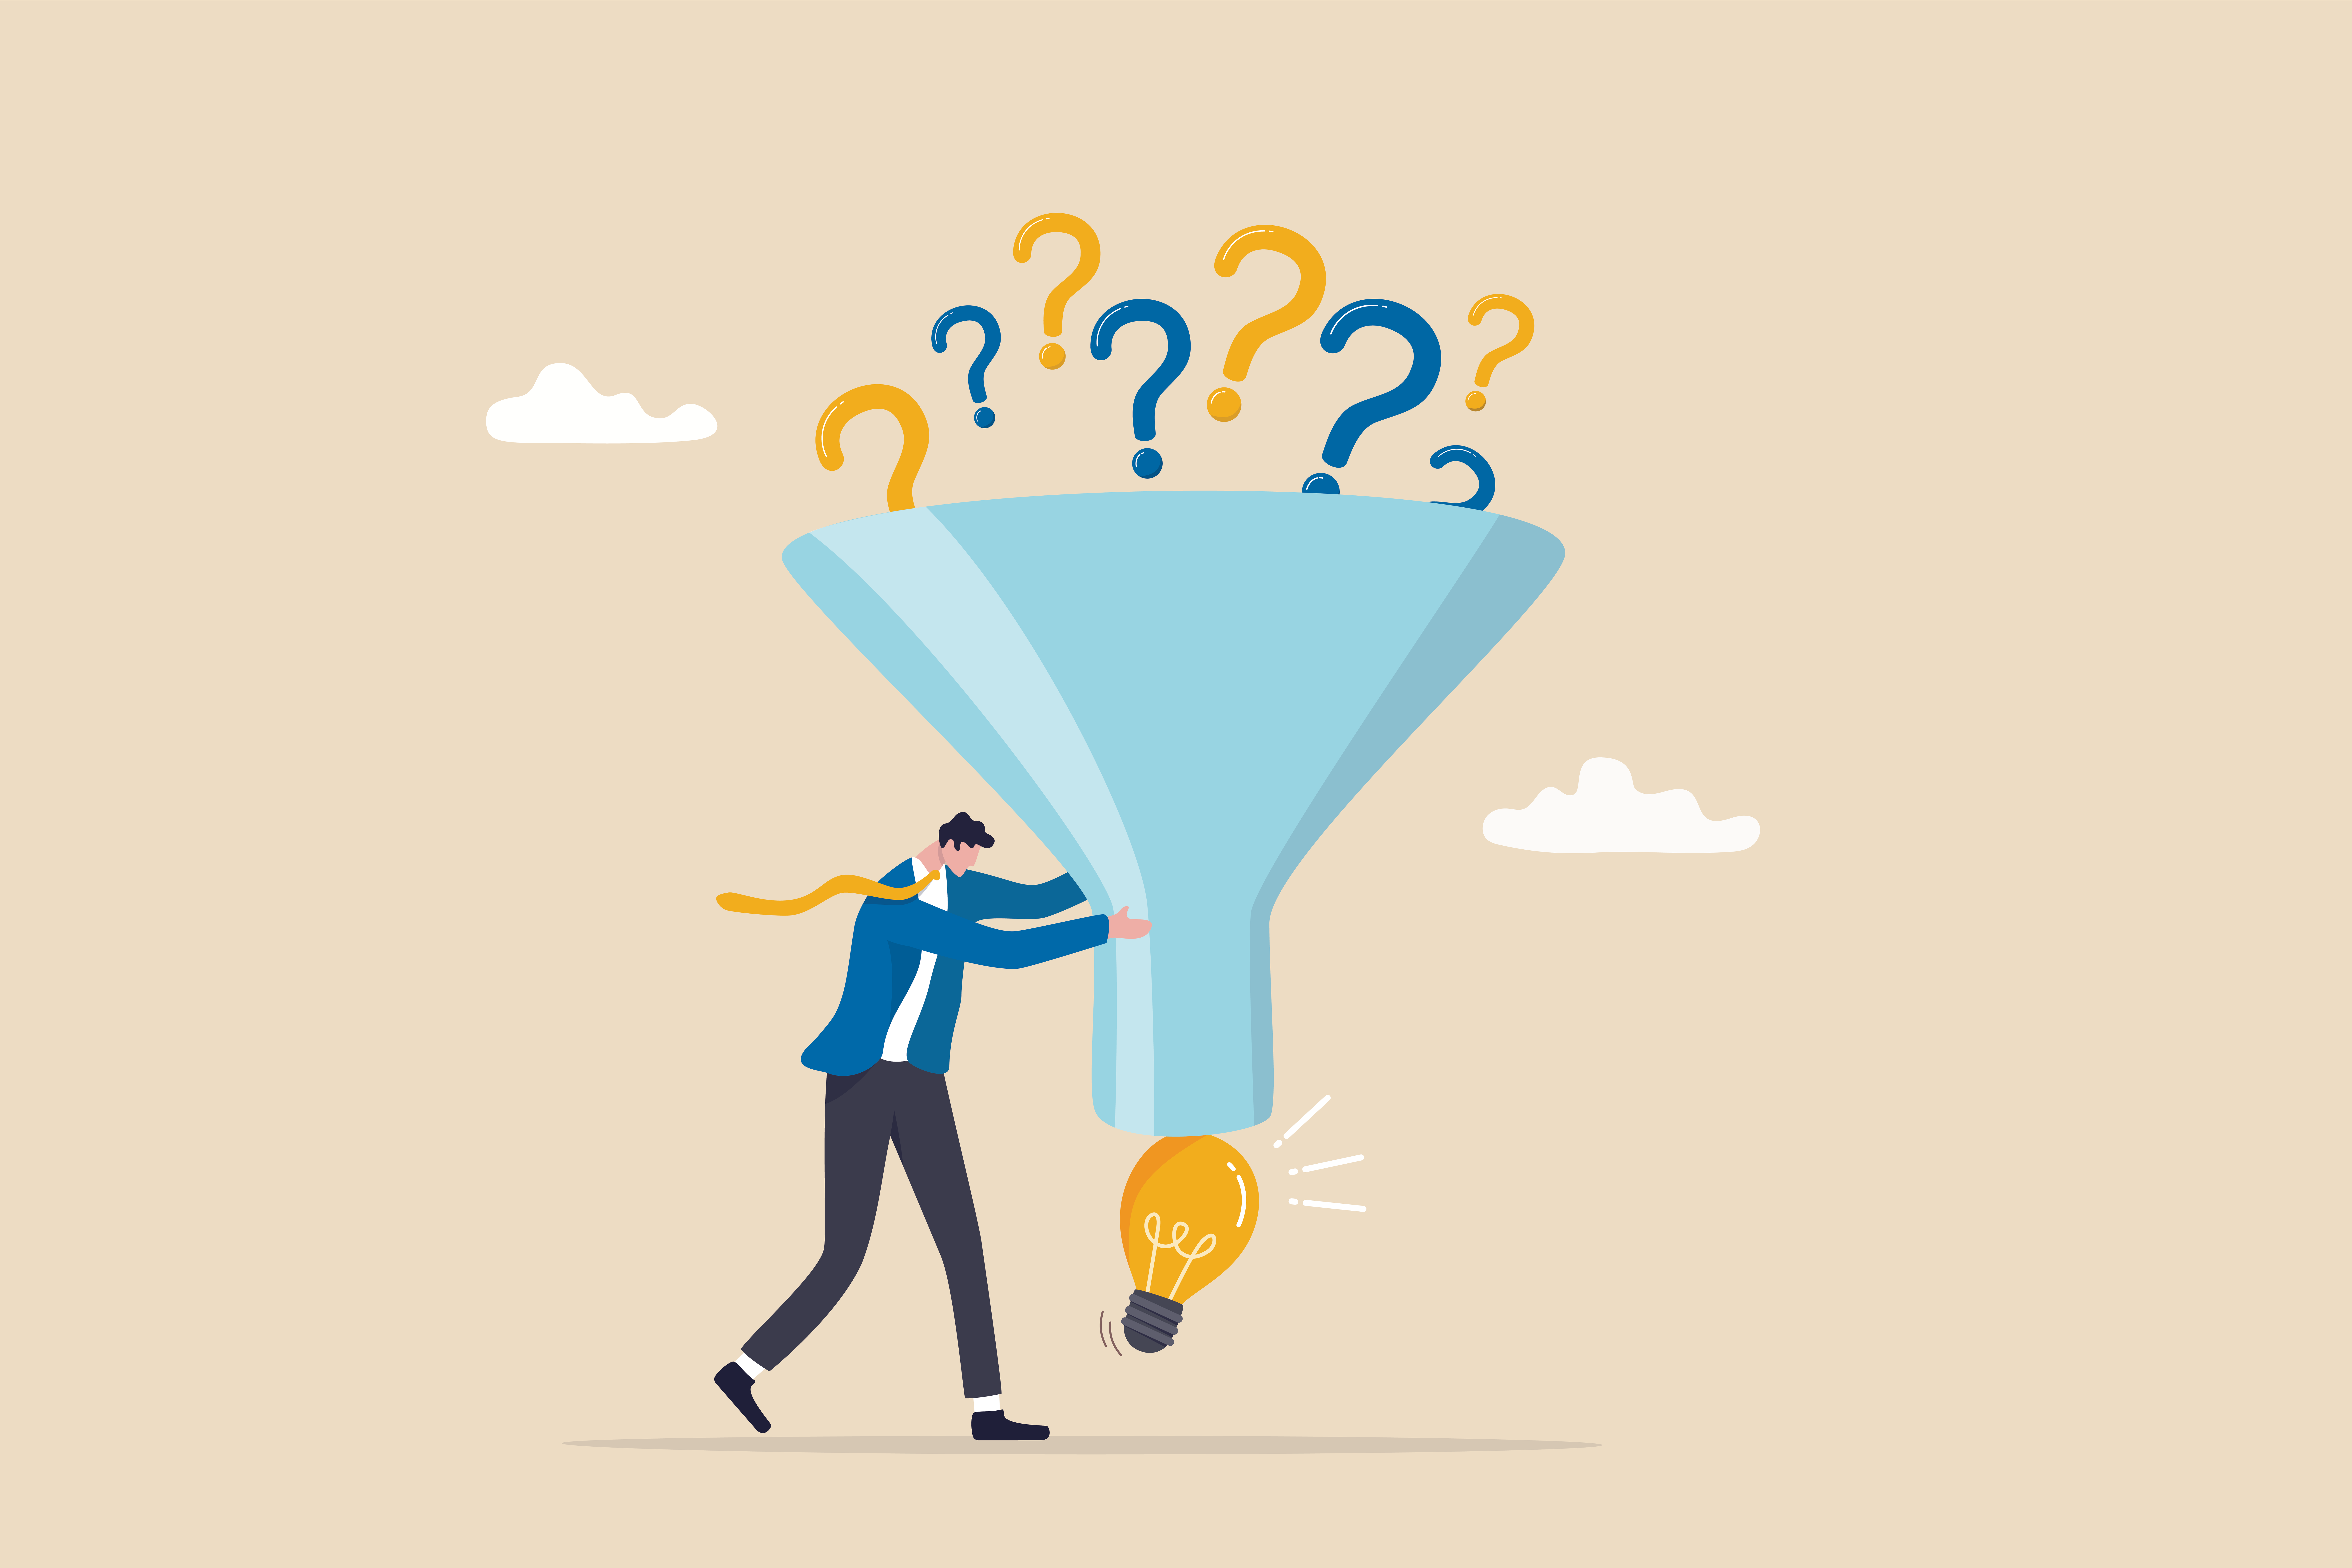 a person in a blue jacket, who is pushing a funnel. On top of the funnel are blue and yellow question marks and at the bottom is a light bulb. Relating to questions that lead to strategy